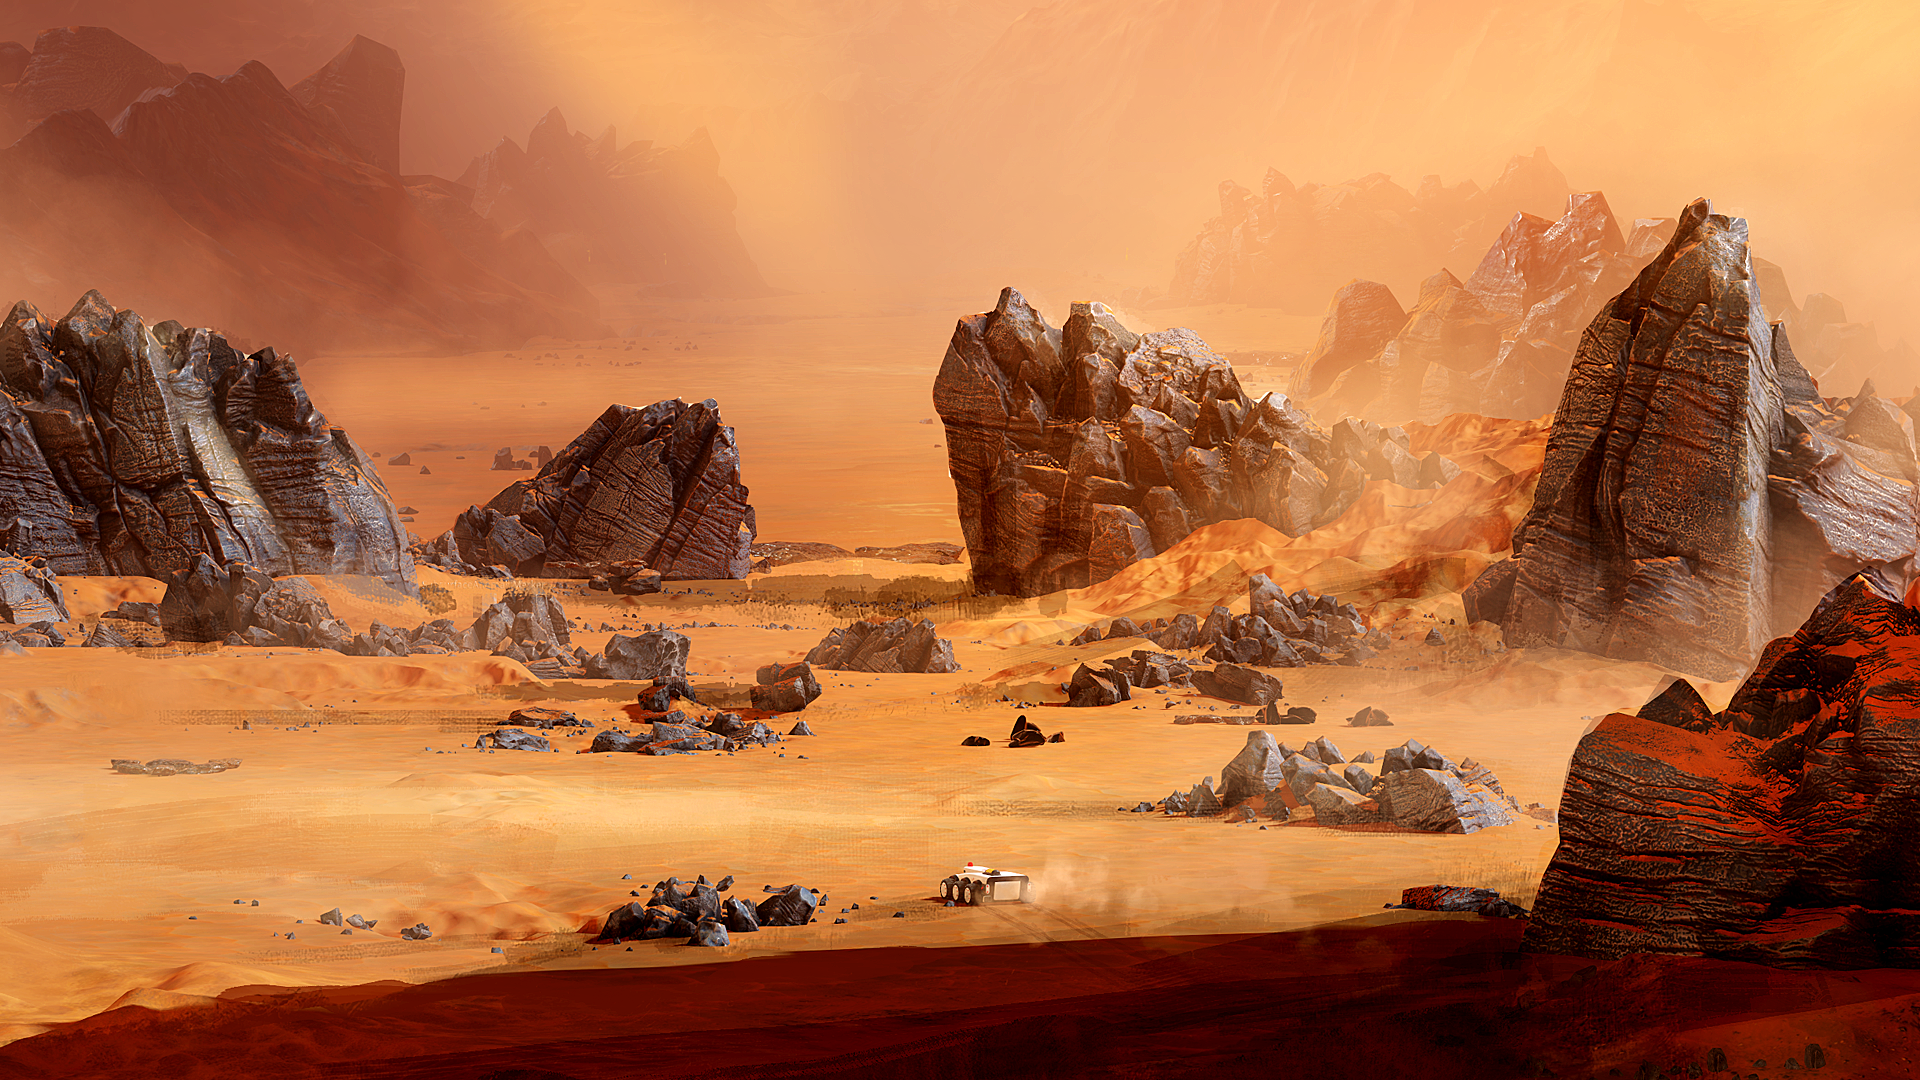 PC Gaming Video Games Mars Surviving Mars Red Planet Exploration Video Game Art Marsscape 1920x1080